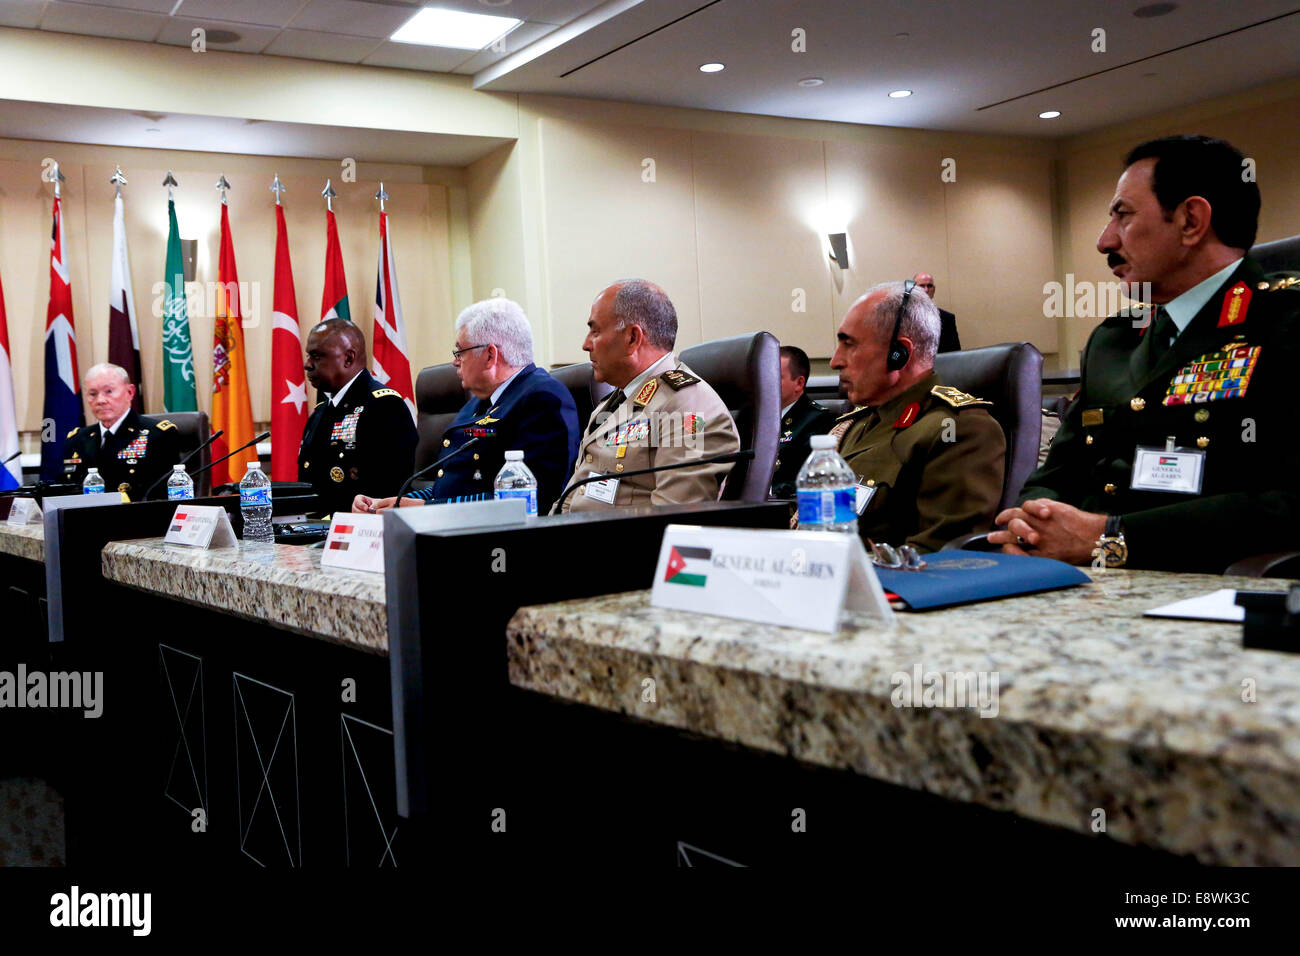 United States President Barack Obama (unseen) speaks after attending a meeting hosted by Joint Chiefs of Staff General Martin E. Dempsey (L) with the military leadership from 21 coalition partner nations to discuss the coalition efforts in the ongoing campaign against ISIL on October 14, 2014 at Joint Base Andrews in Maryland. Air Marshal Binskin from Australia (3L), General Yousif from Bahrain, General Gerard Van Caelenberge from Belgium, General Lawson from Canada (2L), Lieutenant General Ludvigsen from Denmark, Lieutenant General Hegazy from Egypt (3R), General de Villiers from France (L), Stock Photo